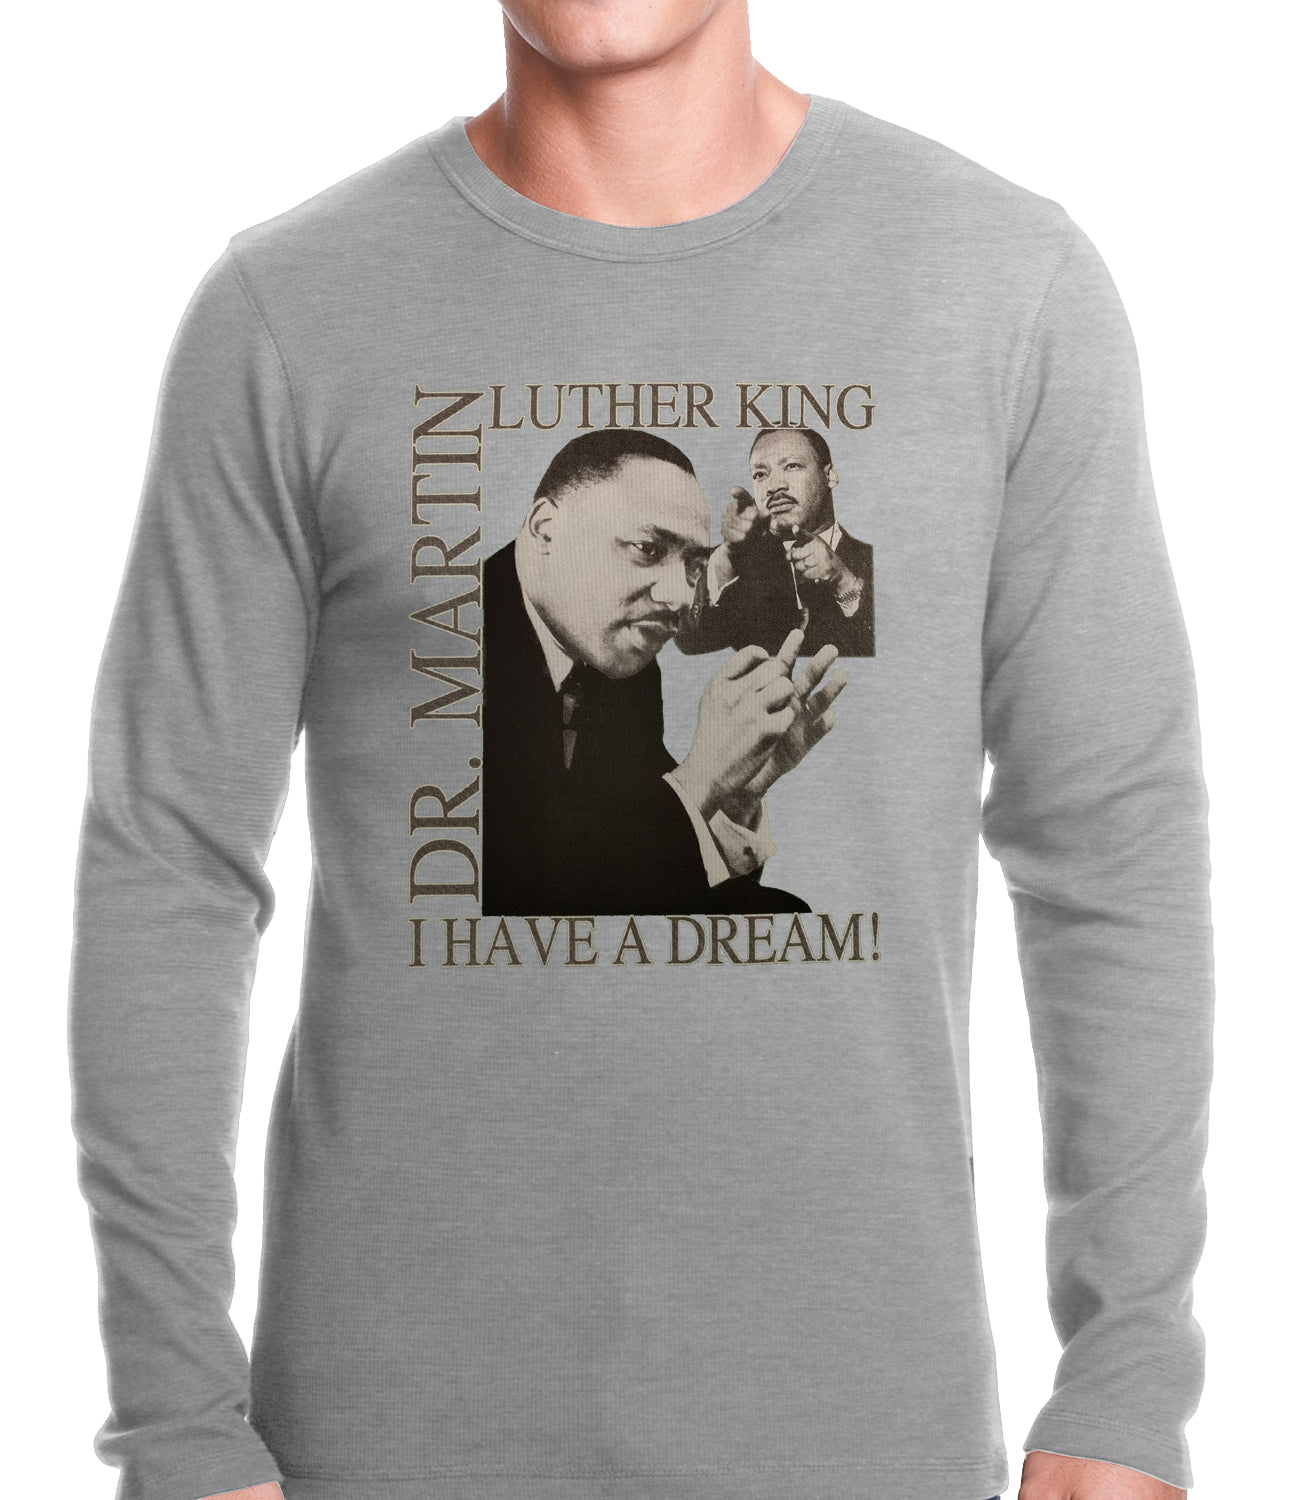 Dr. Martin Luther King Jr. "I Have a Dream" Thermal Shirt